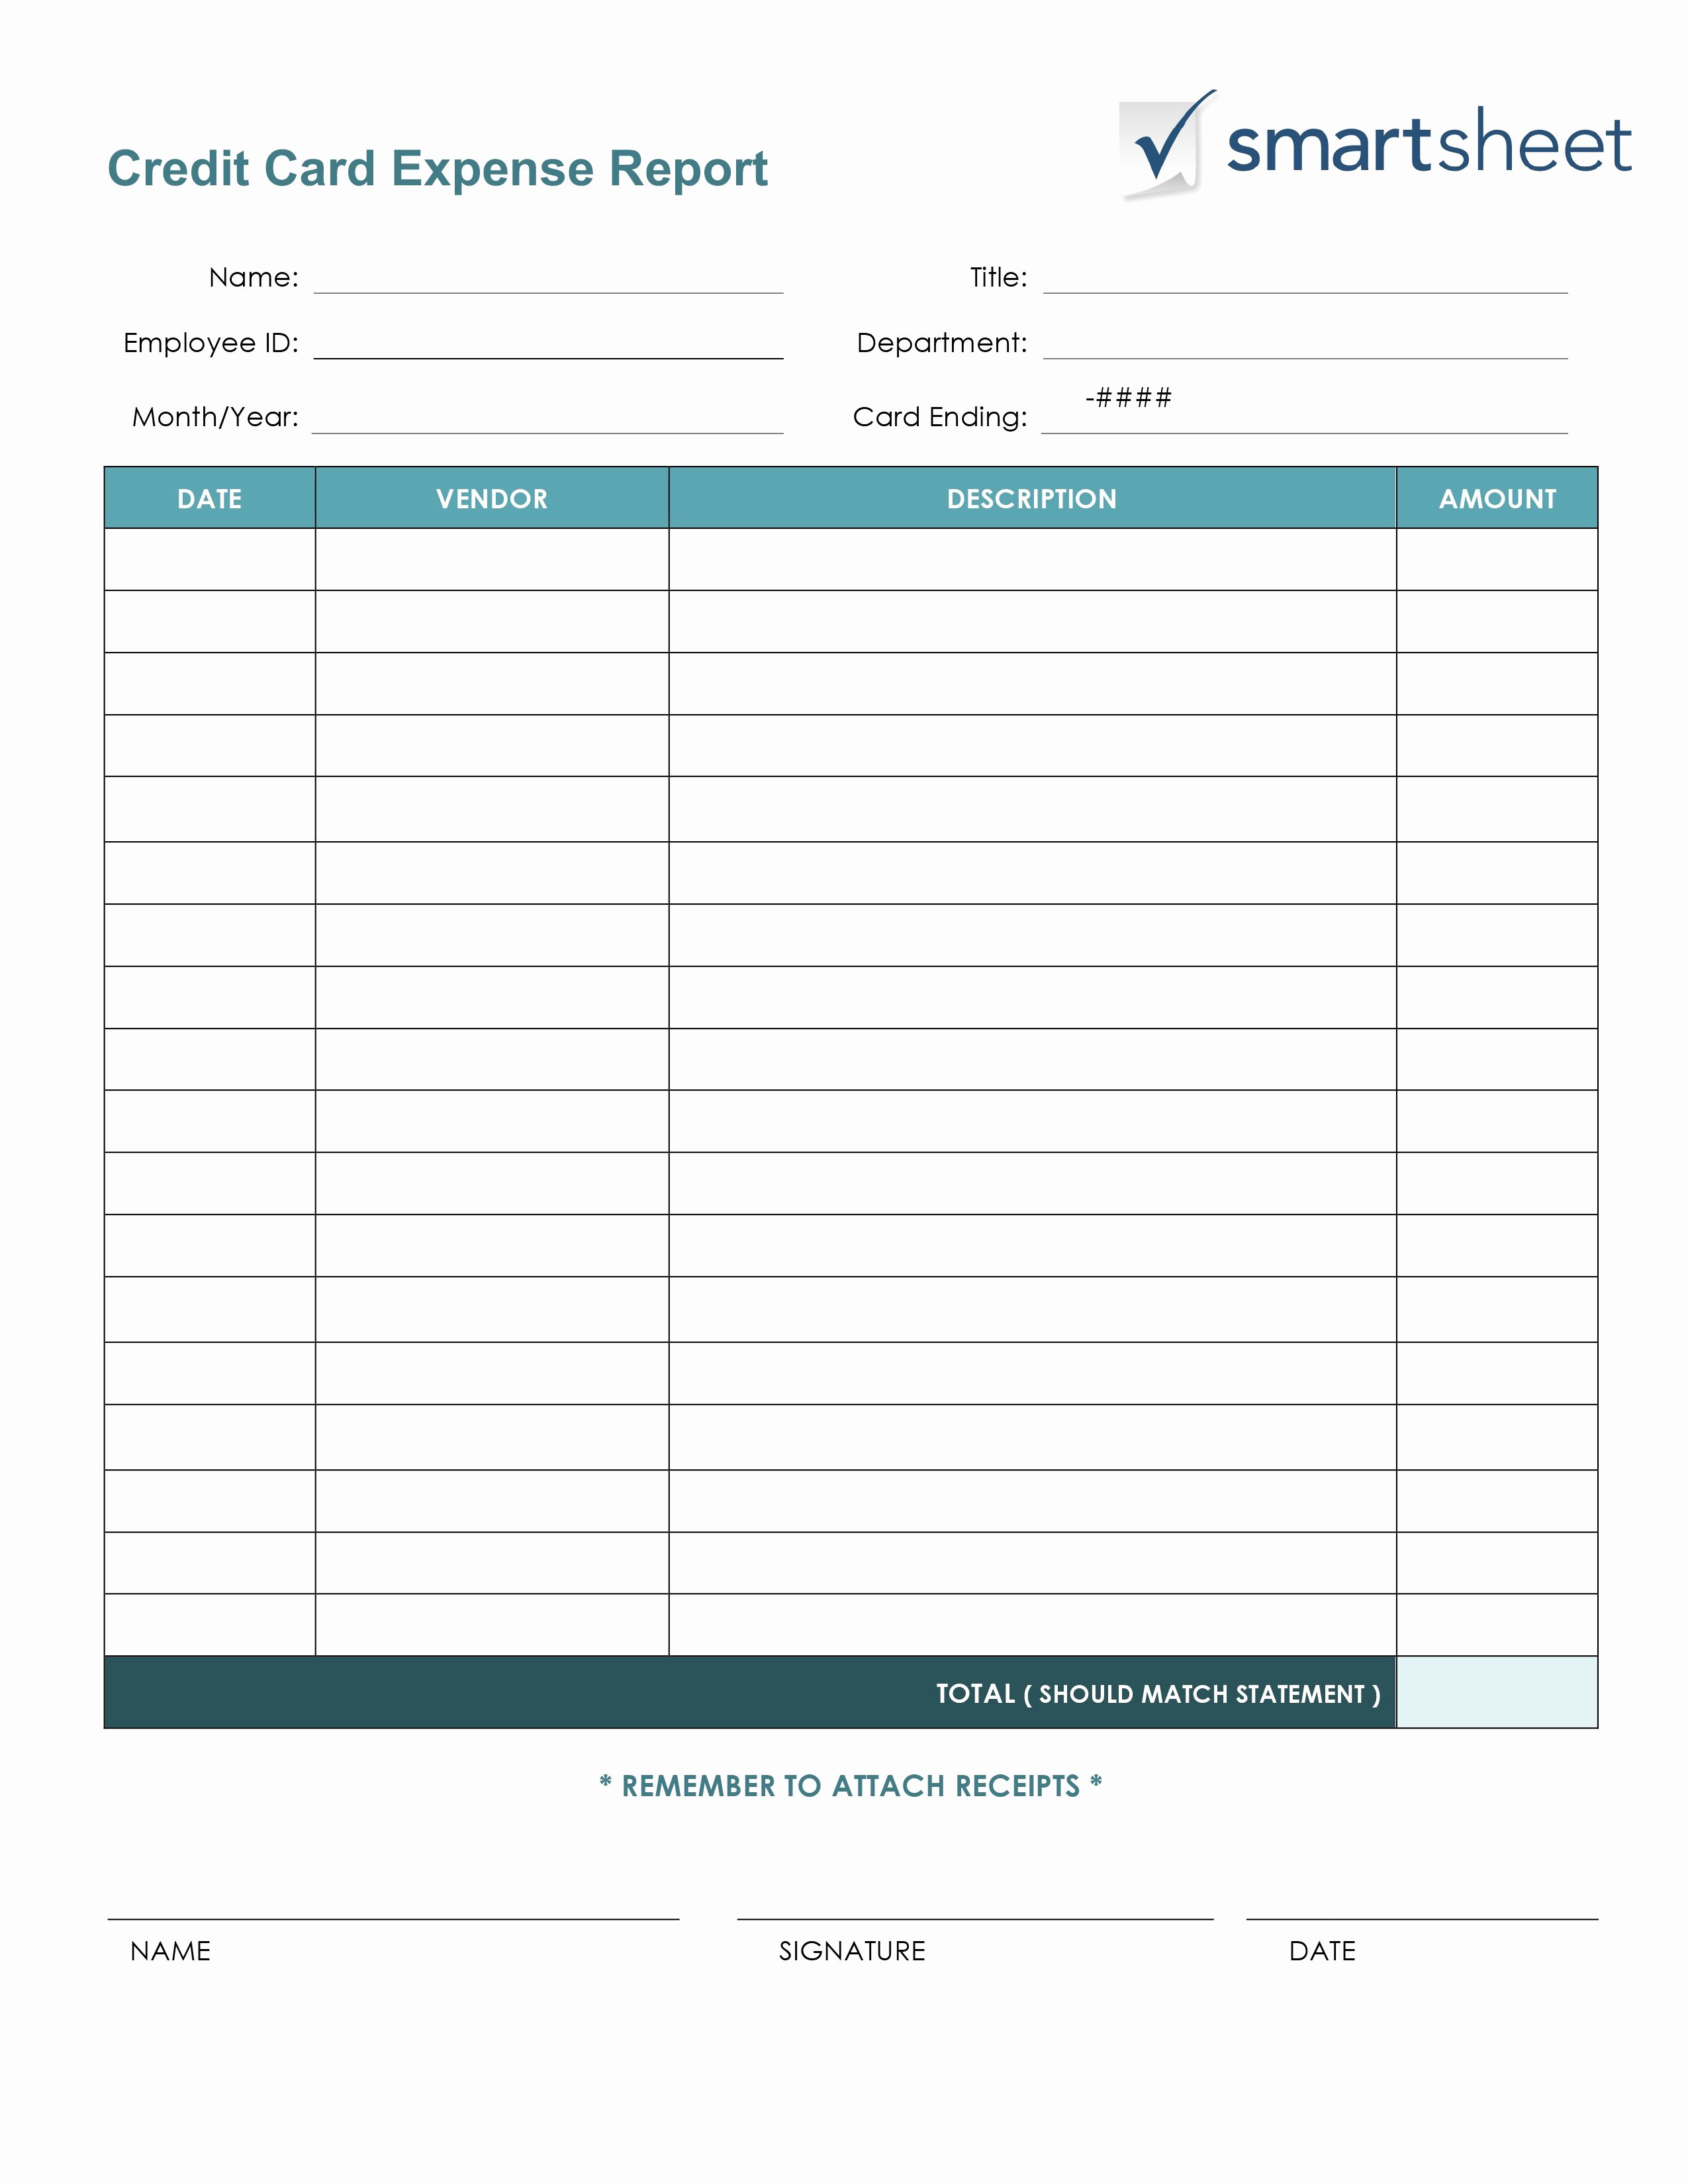 Expense Report form Template Best Of Free Expense Report Templates Smartsheet